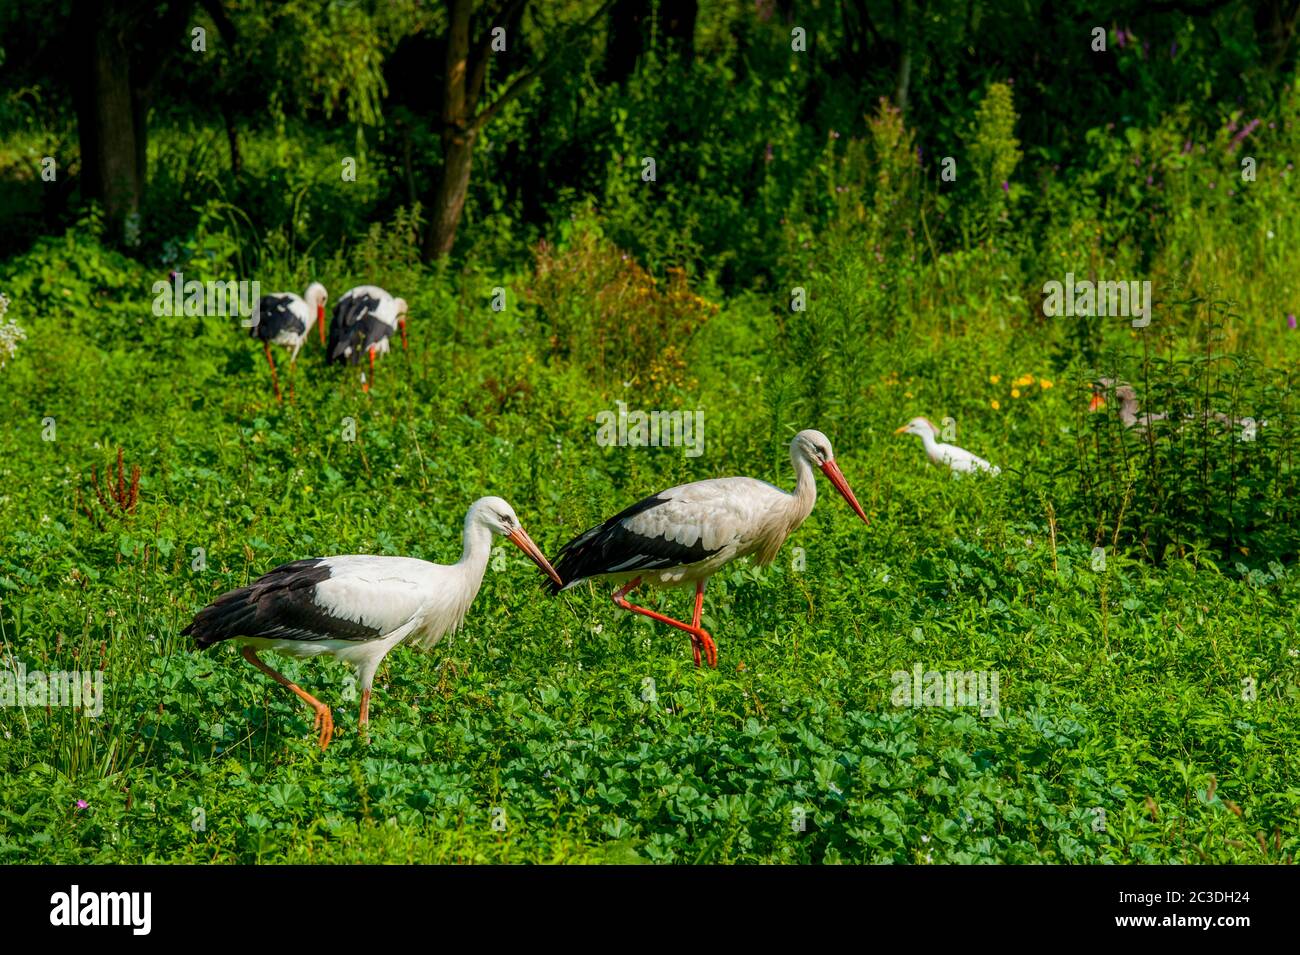 White storks (Ciconia ciconia) feeding in a meadow at the Centre de reintroduction des cigognes (Center to reintroduce the whit stork) near Hunawihr, Stock Photo